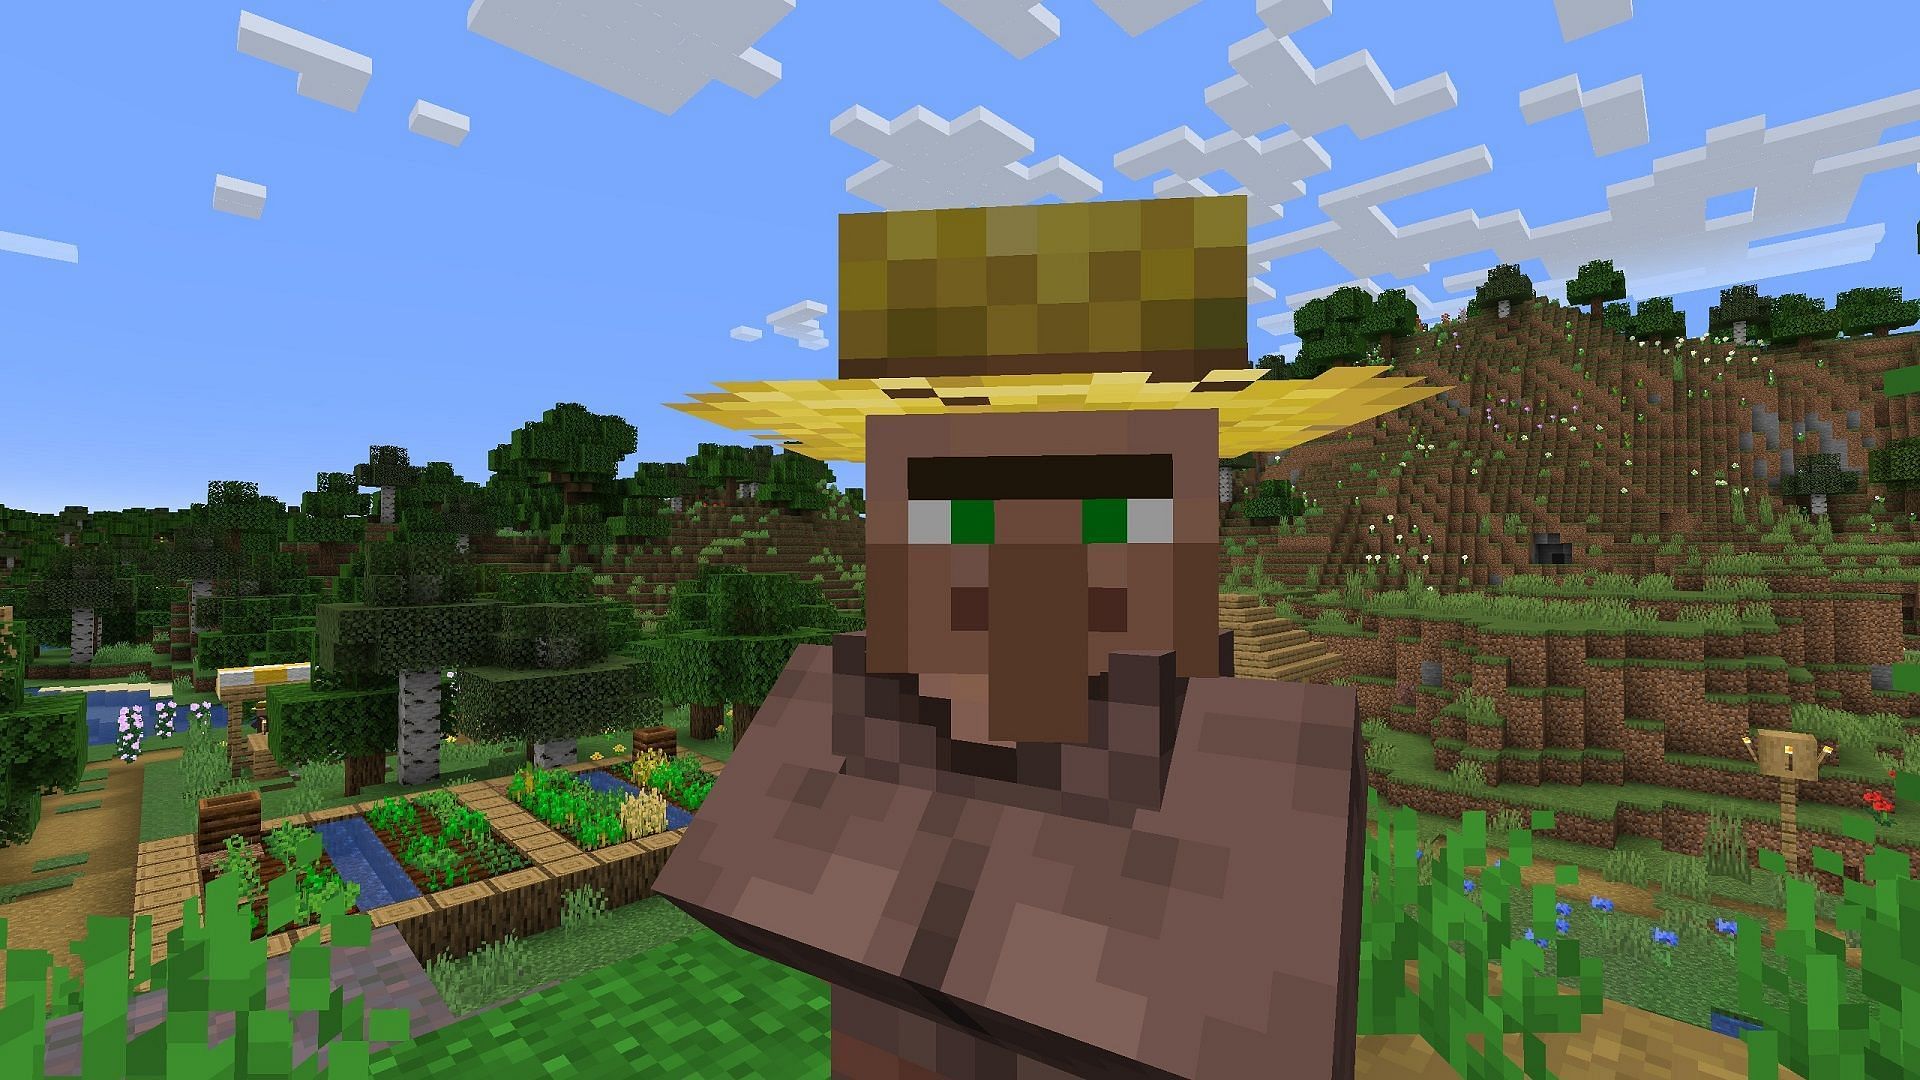 Villager trading can lead to a quick XP boost in Minecraft if used wisely (Image via Mojang)